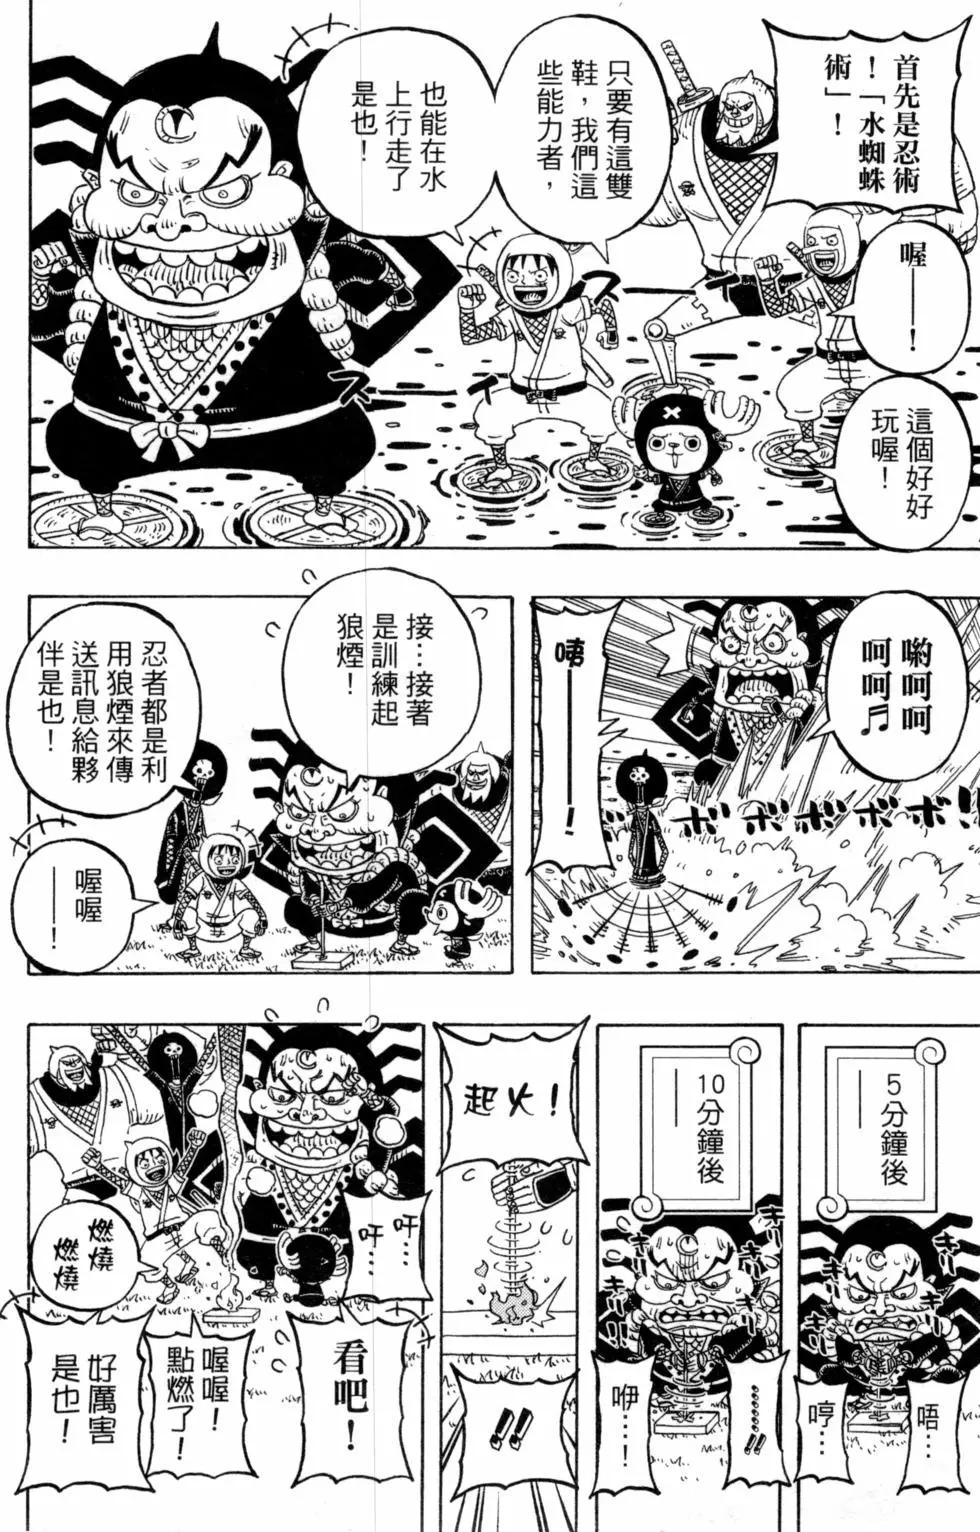 One piece party - 第06卷(1/4) - 5